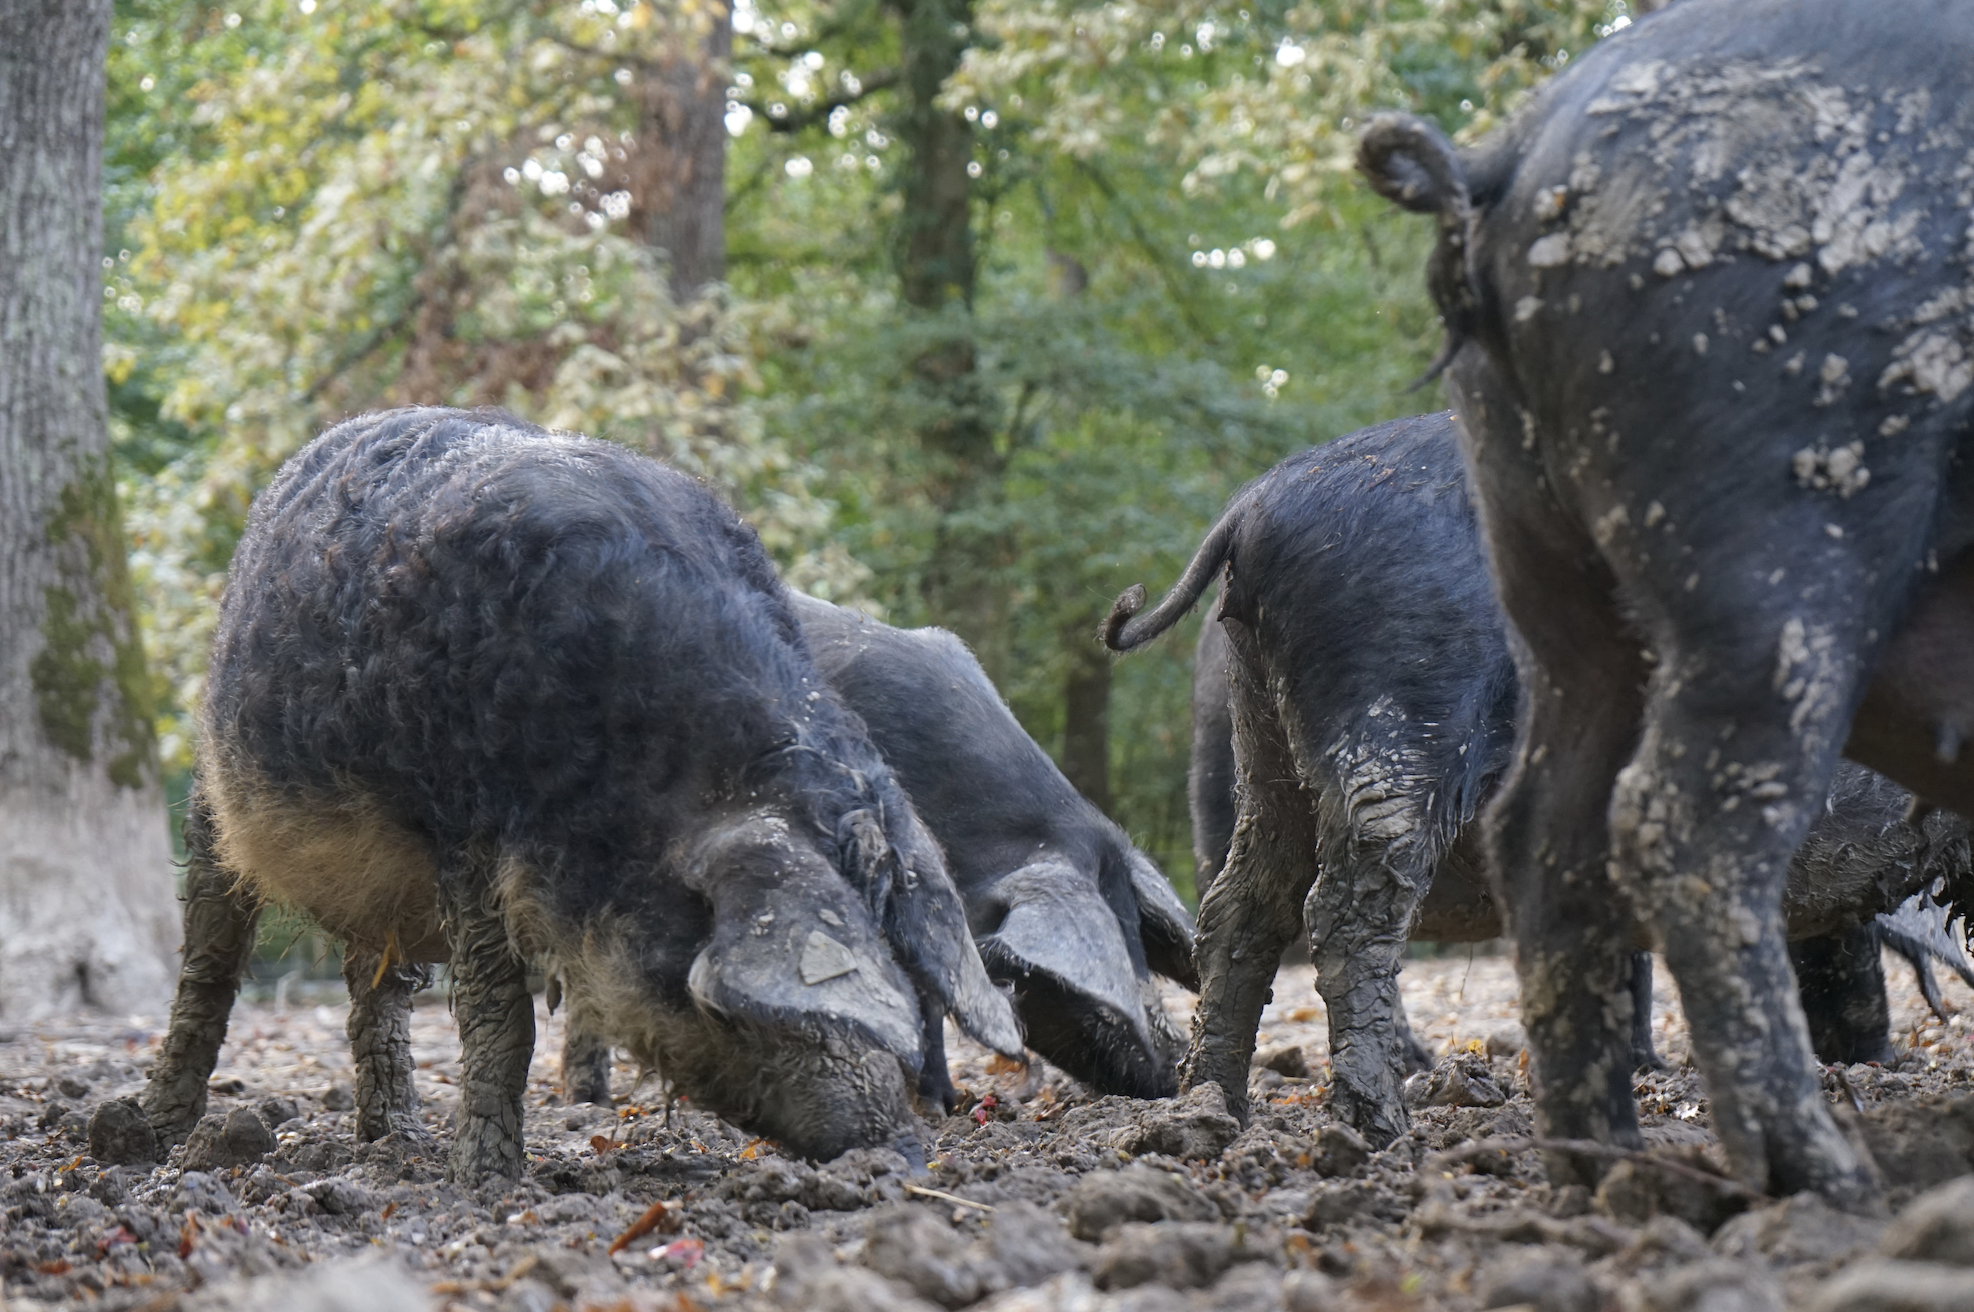 Pigs rummage around in a Serbian agroforestry system